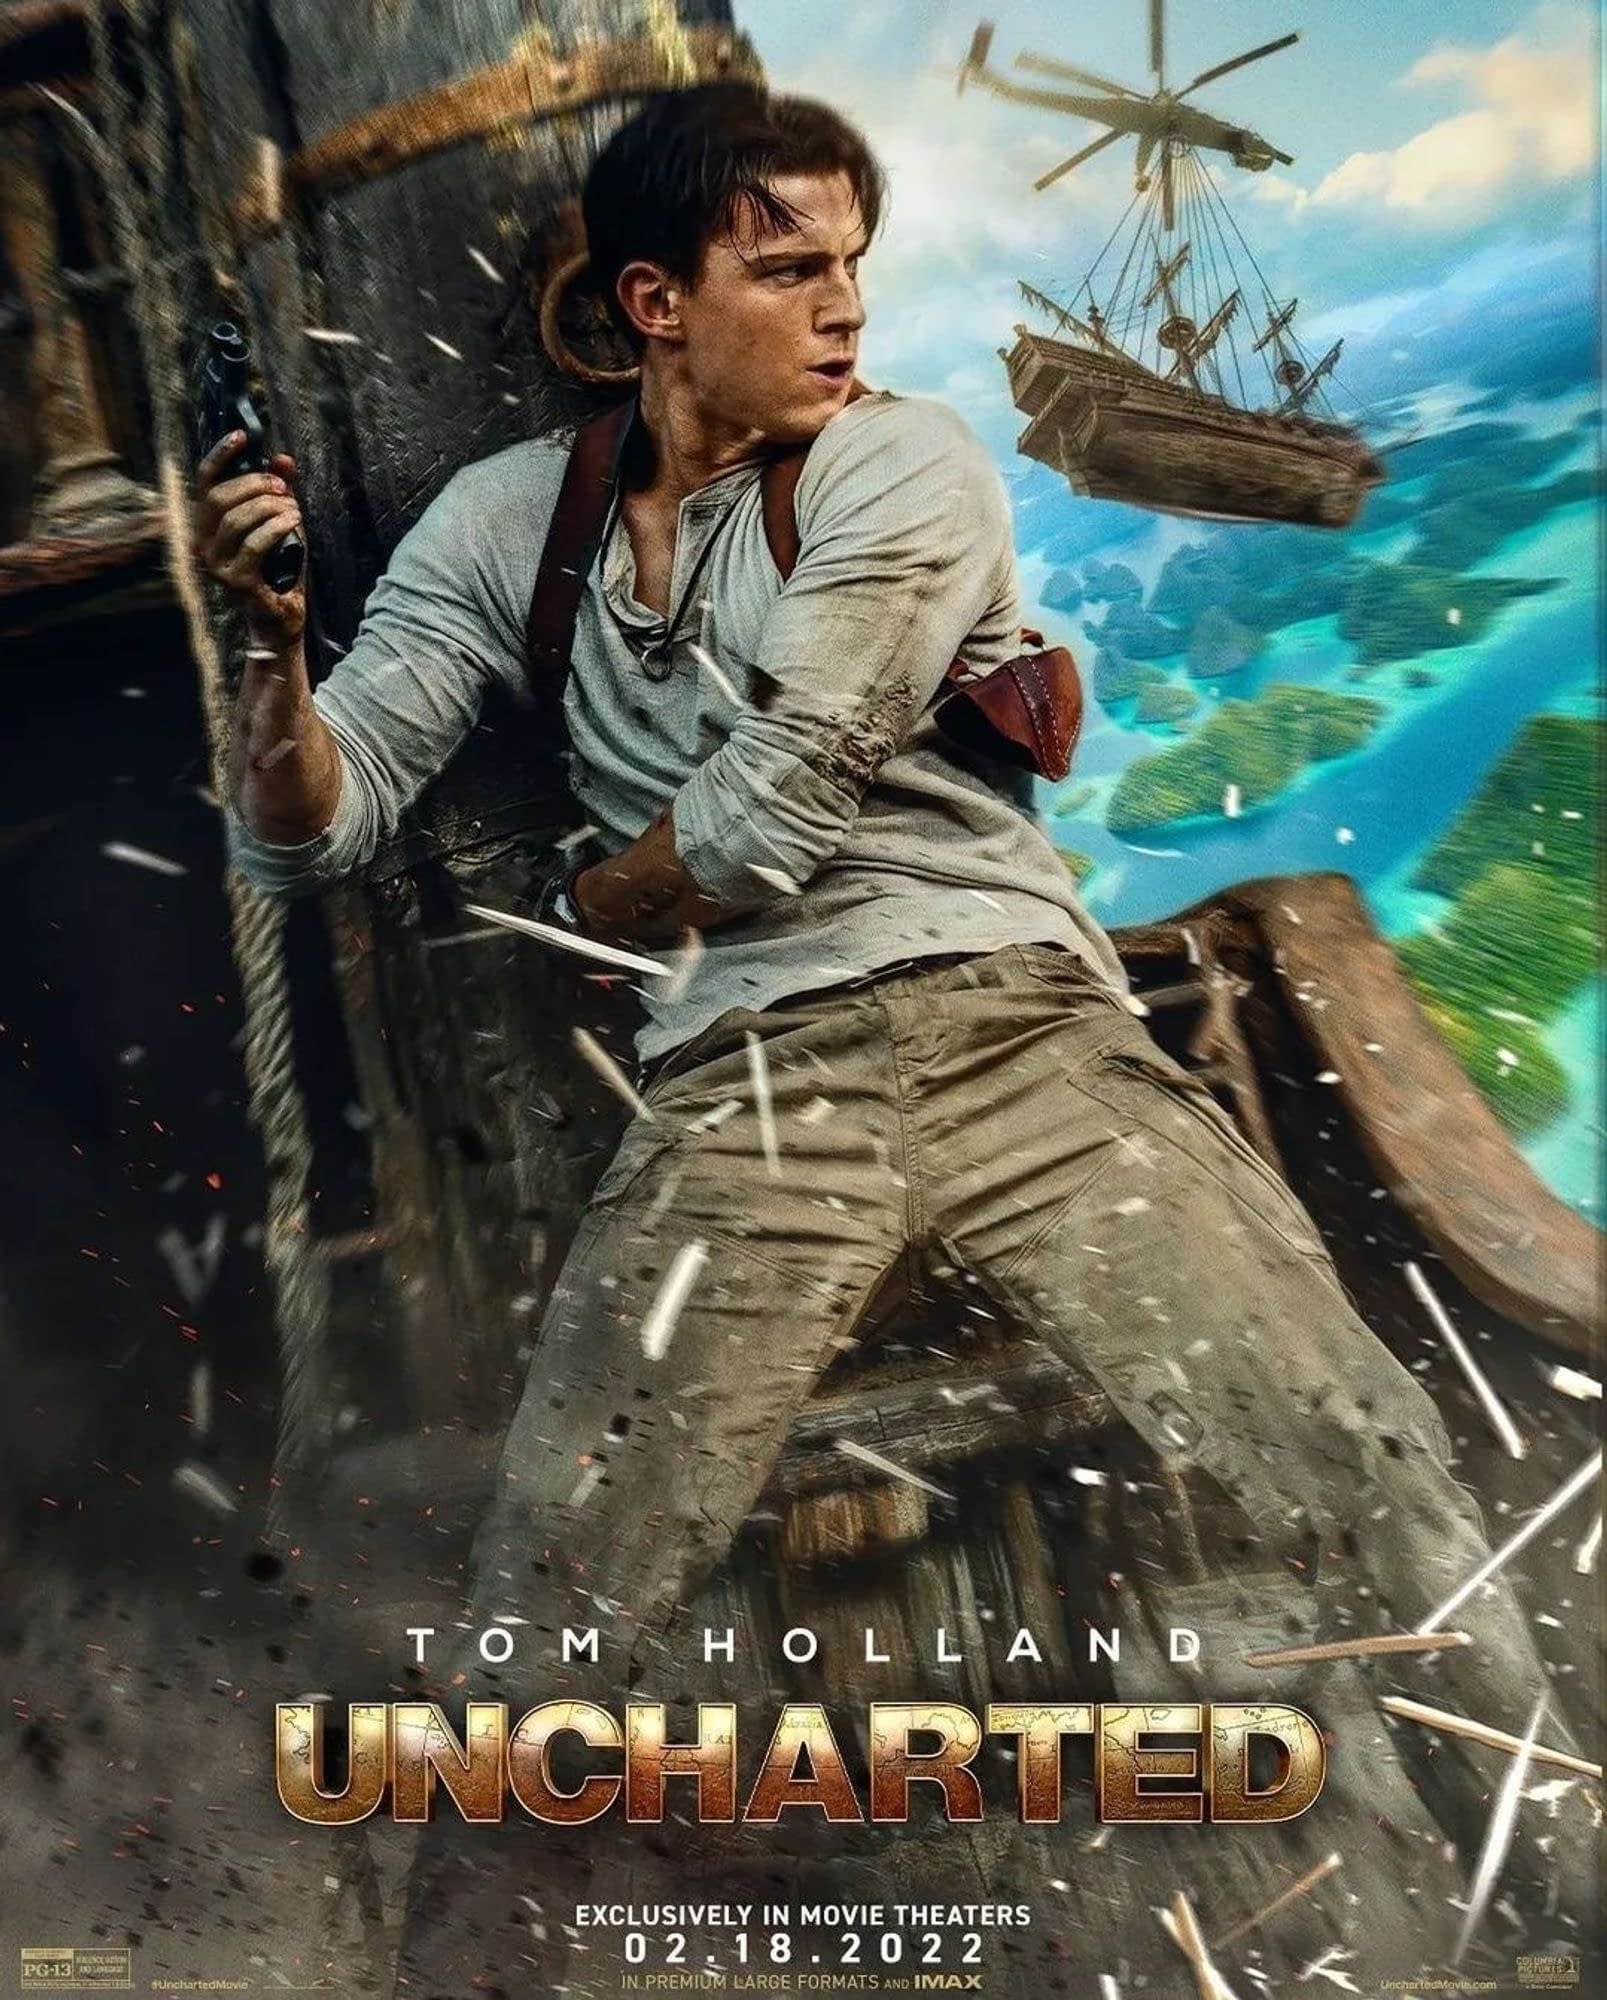 Why Uncharted's Reviews Are So Terrible